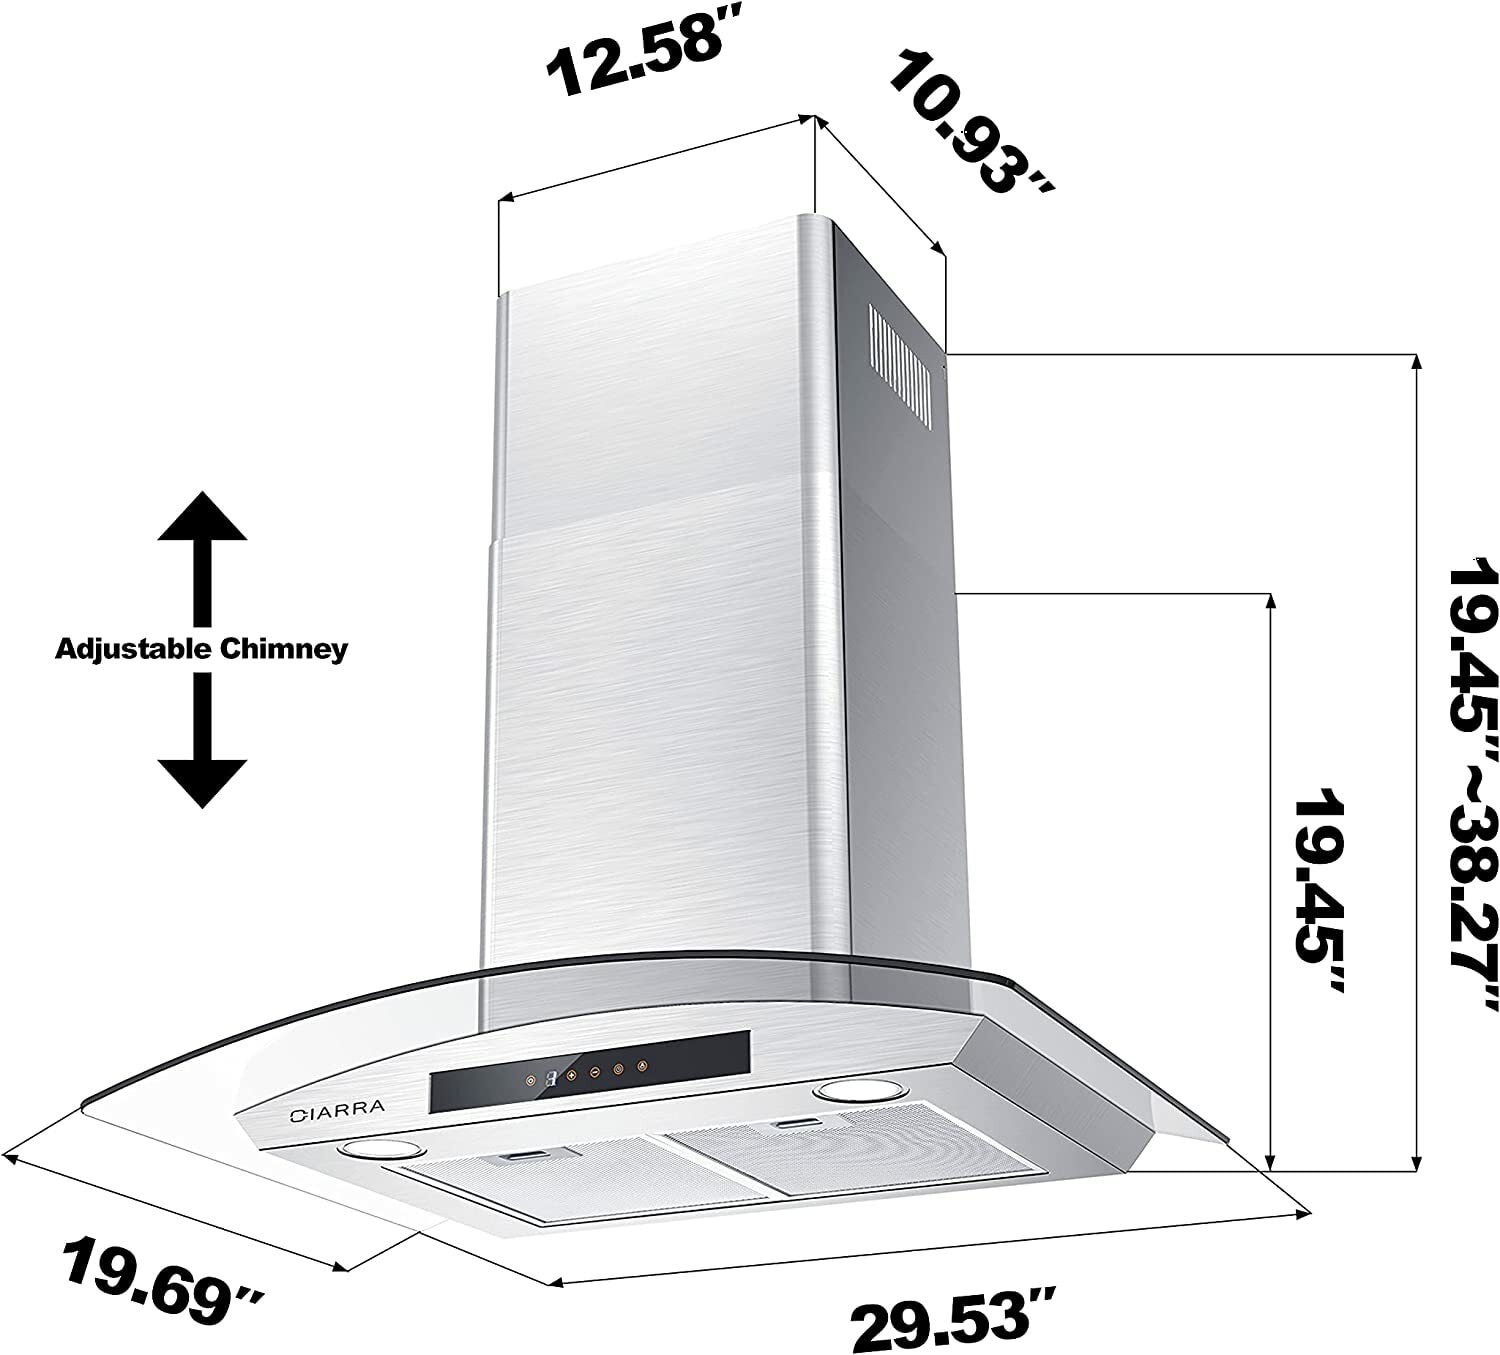 CIARRA CAS75302 Ductless Range Hood 30 inch 450 cFM Wall Mount Vent Hood  for Stove with Permanent Filter, 3 Speed Fan in Stainless Steel cIARRA